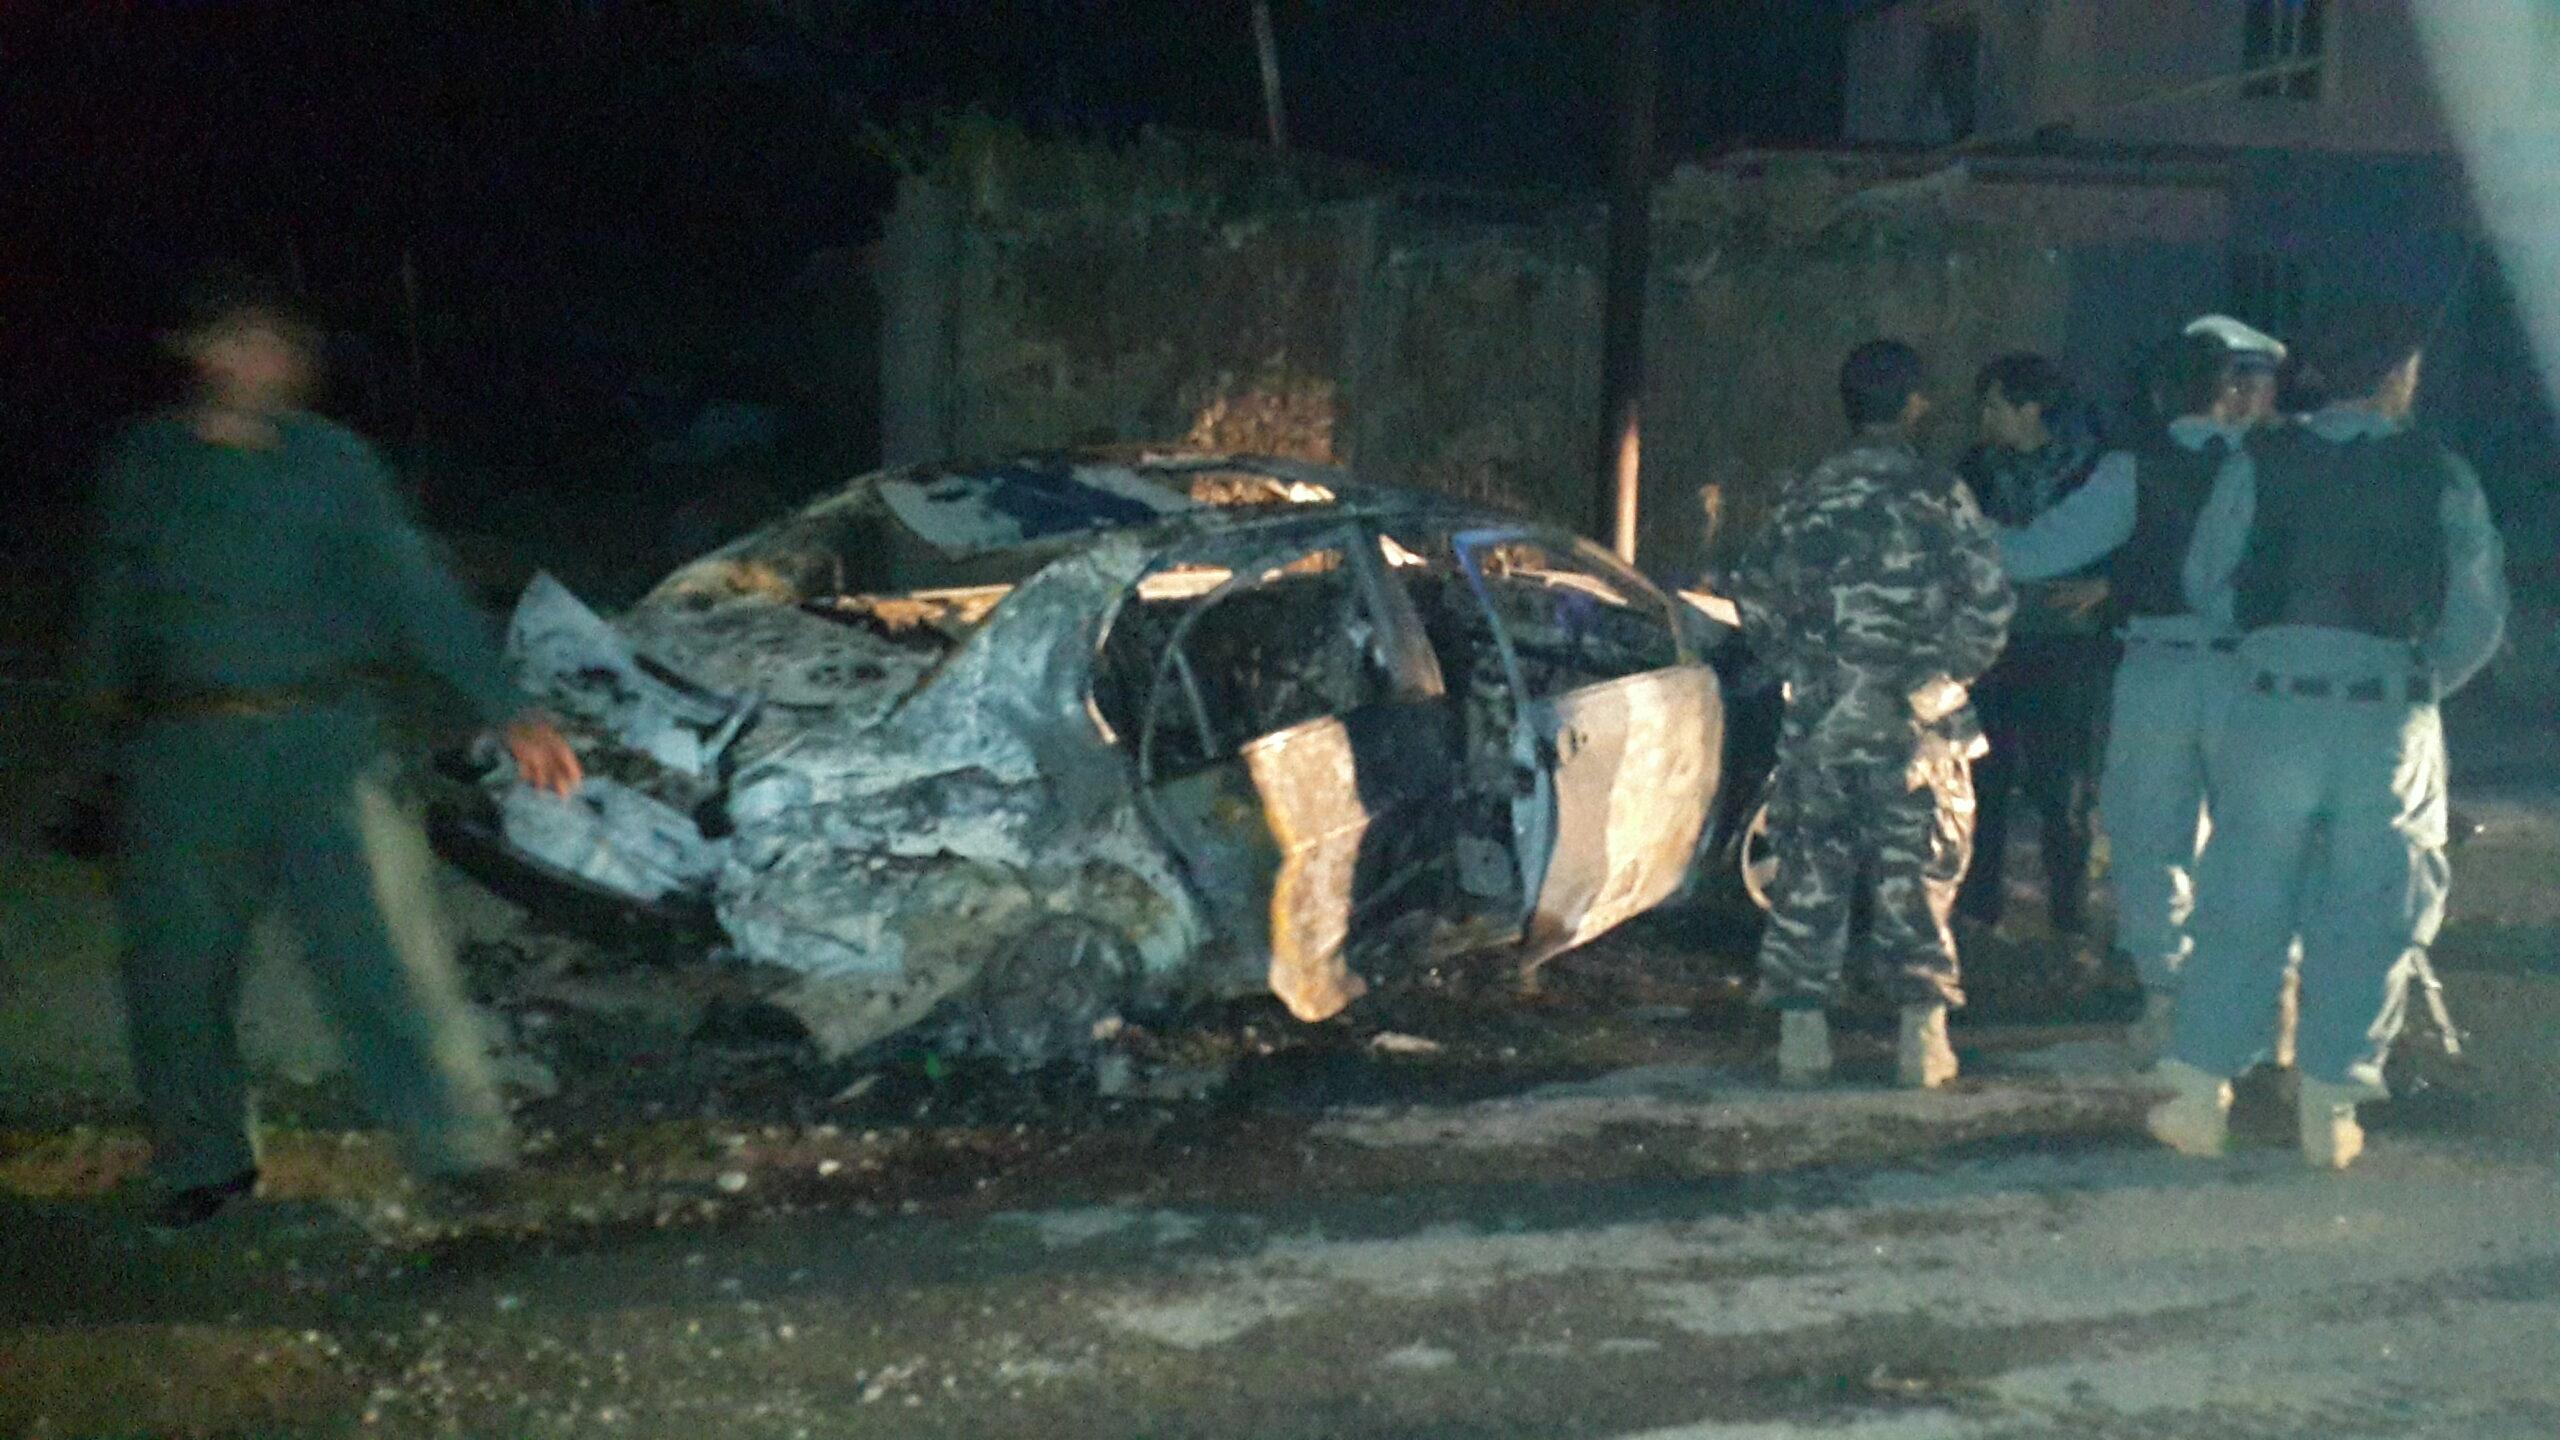 10 killed, 25 wounded in Panjsher suicide attack